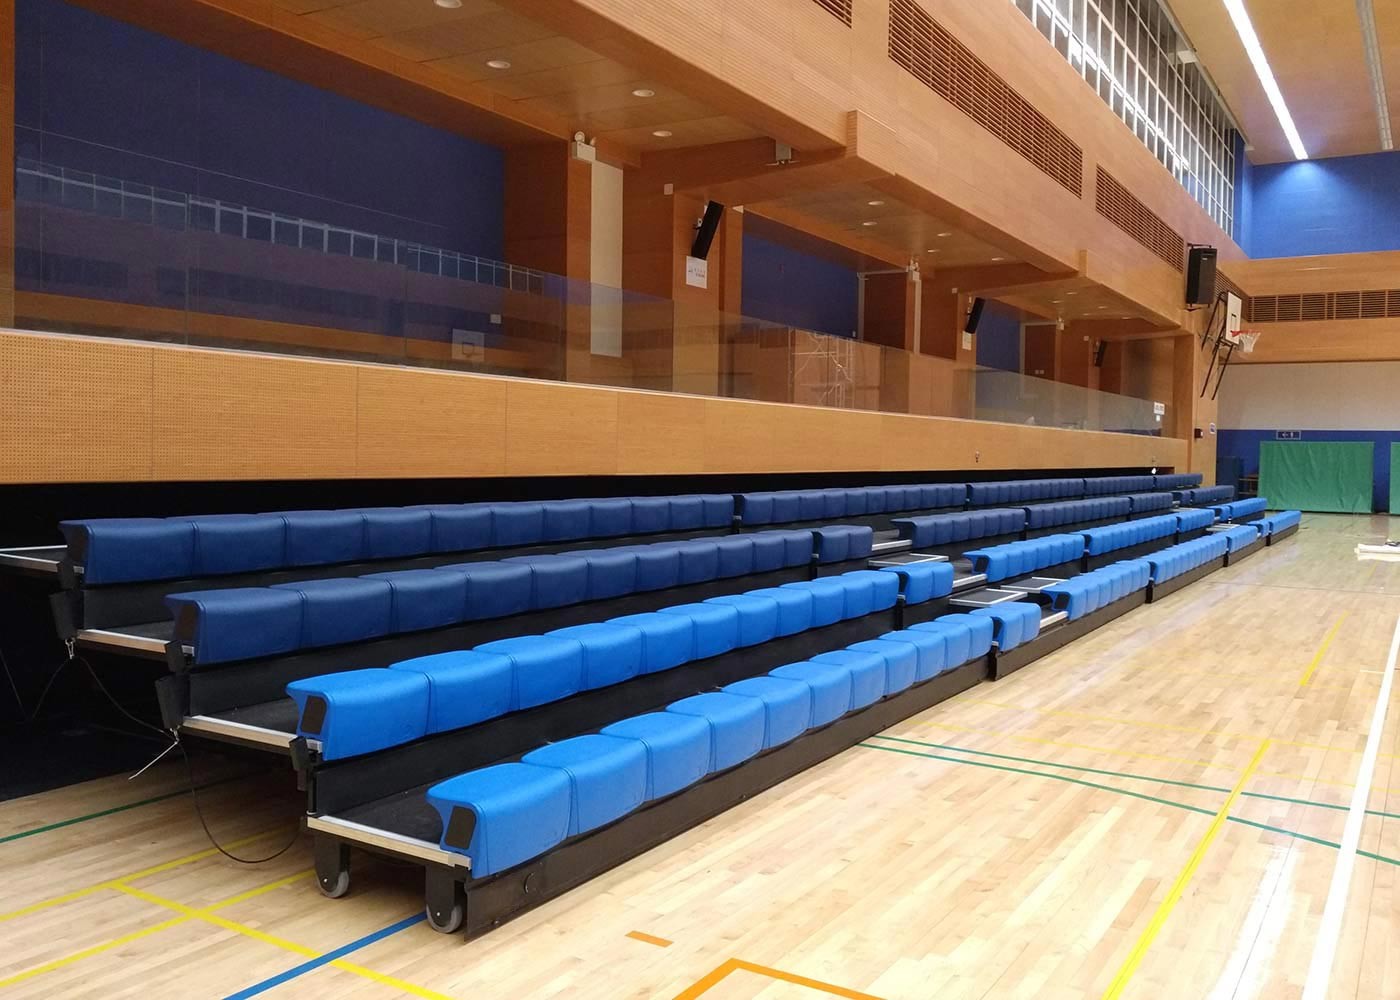 Power Control Retractable Grandstands Retractable Seating System Recessed Polymer Bench